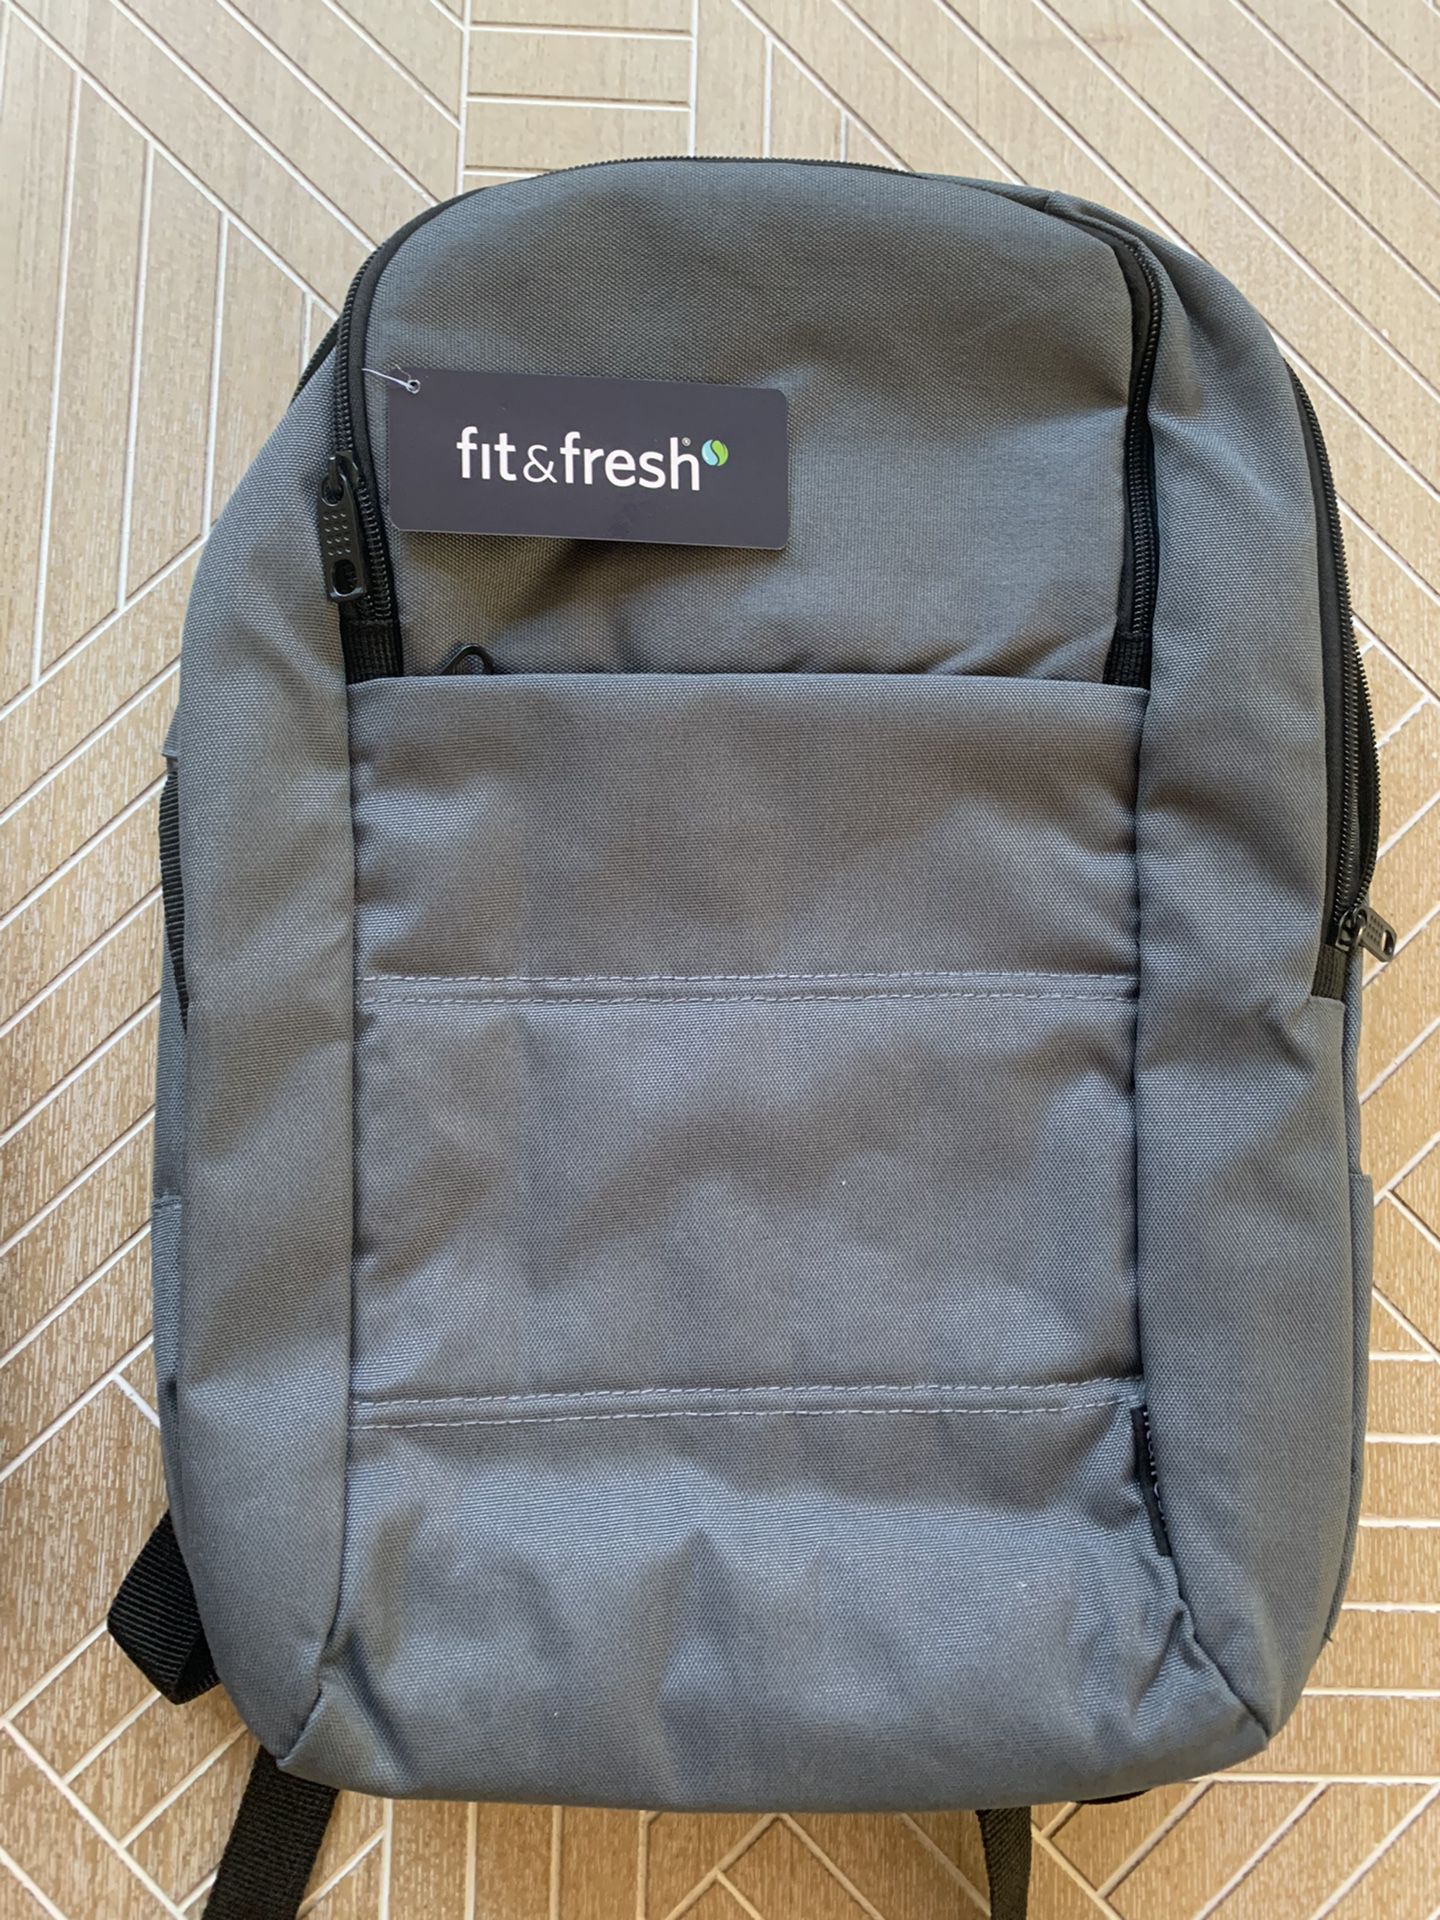 New Laptop Backpack W/tags